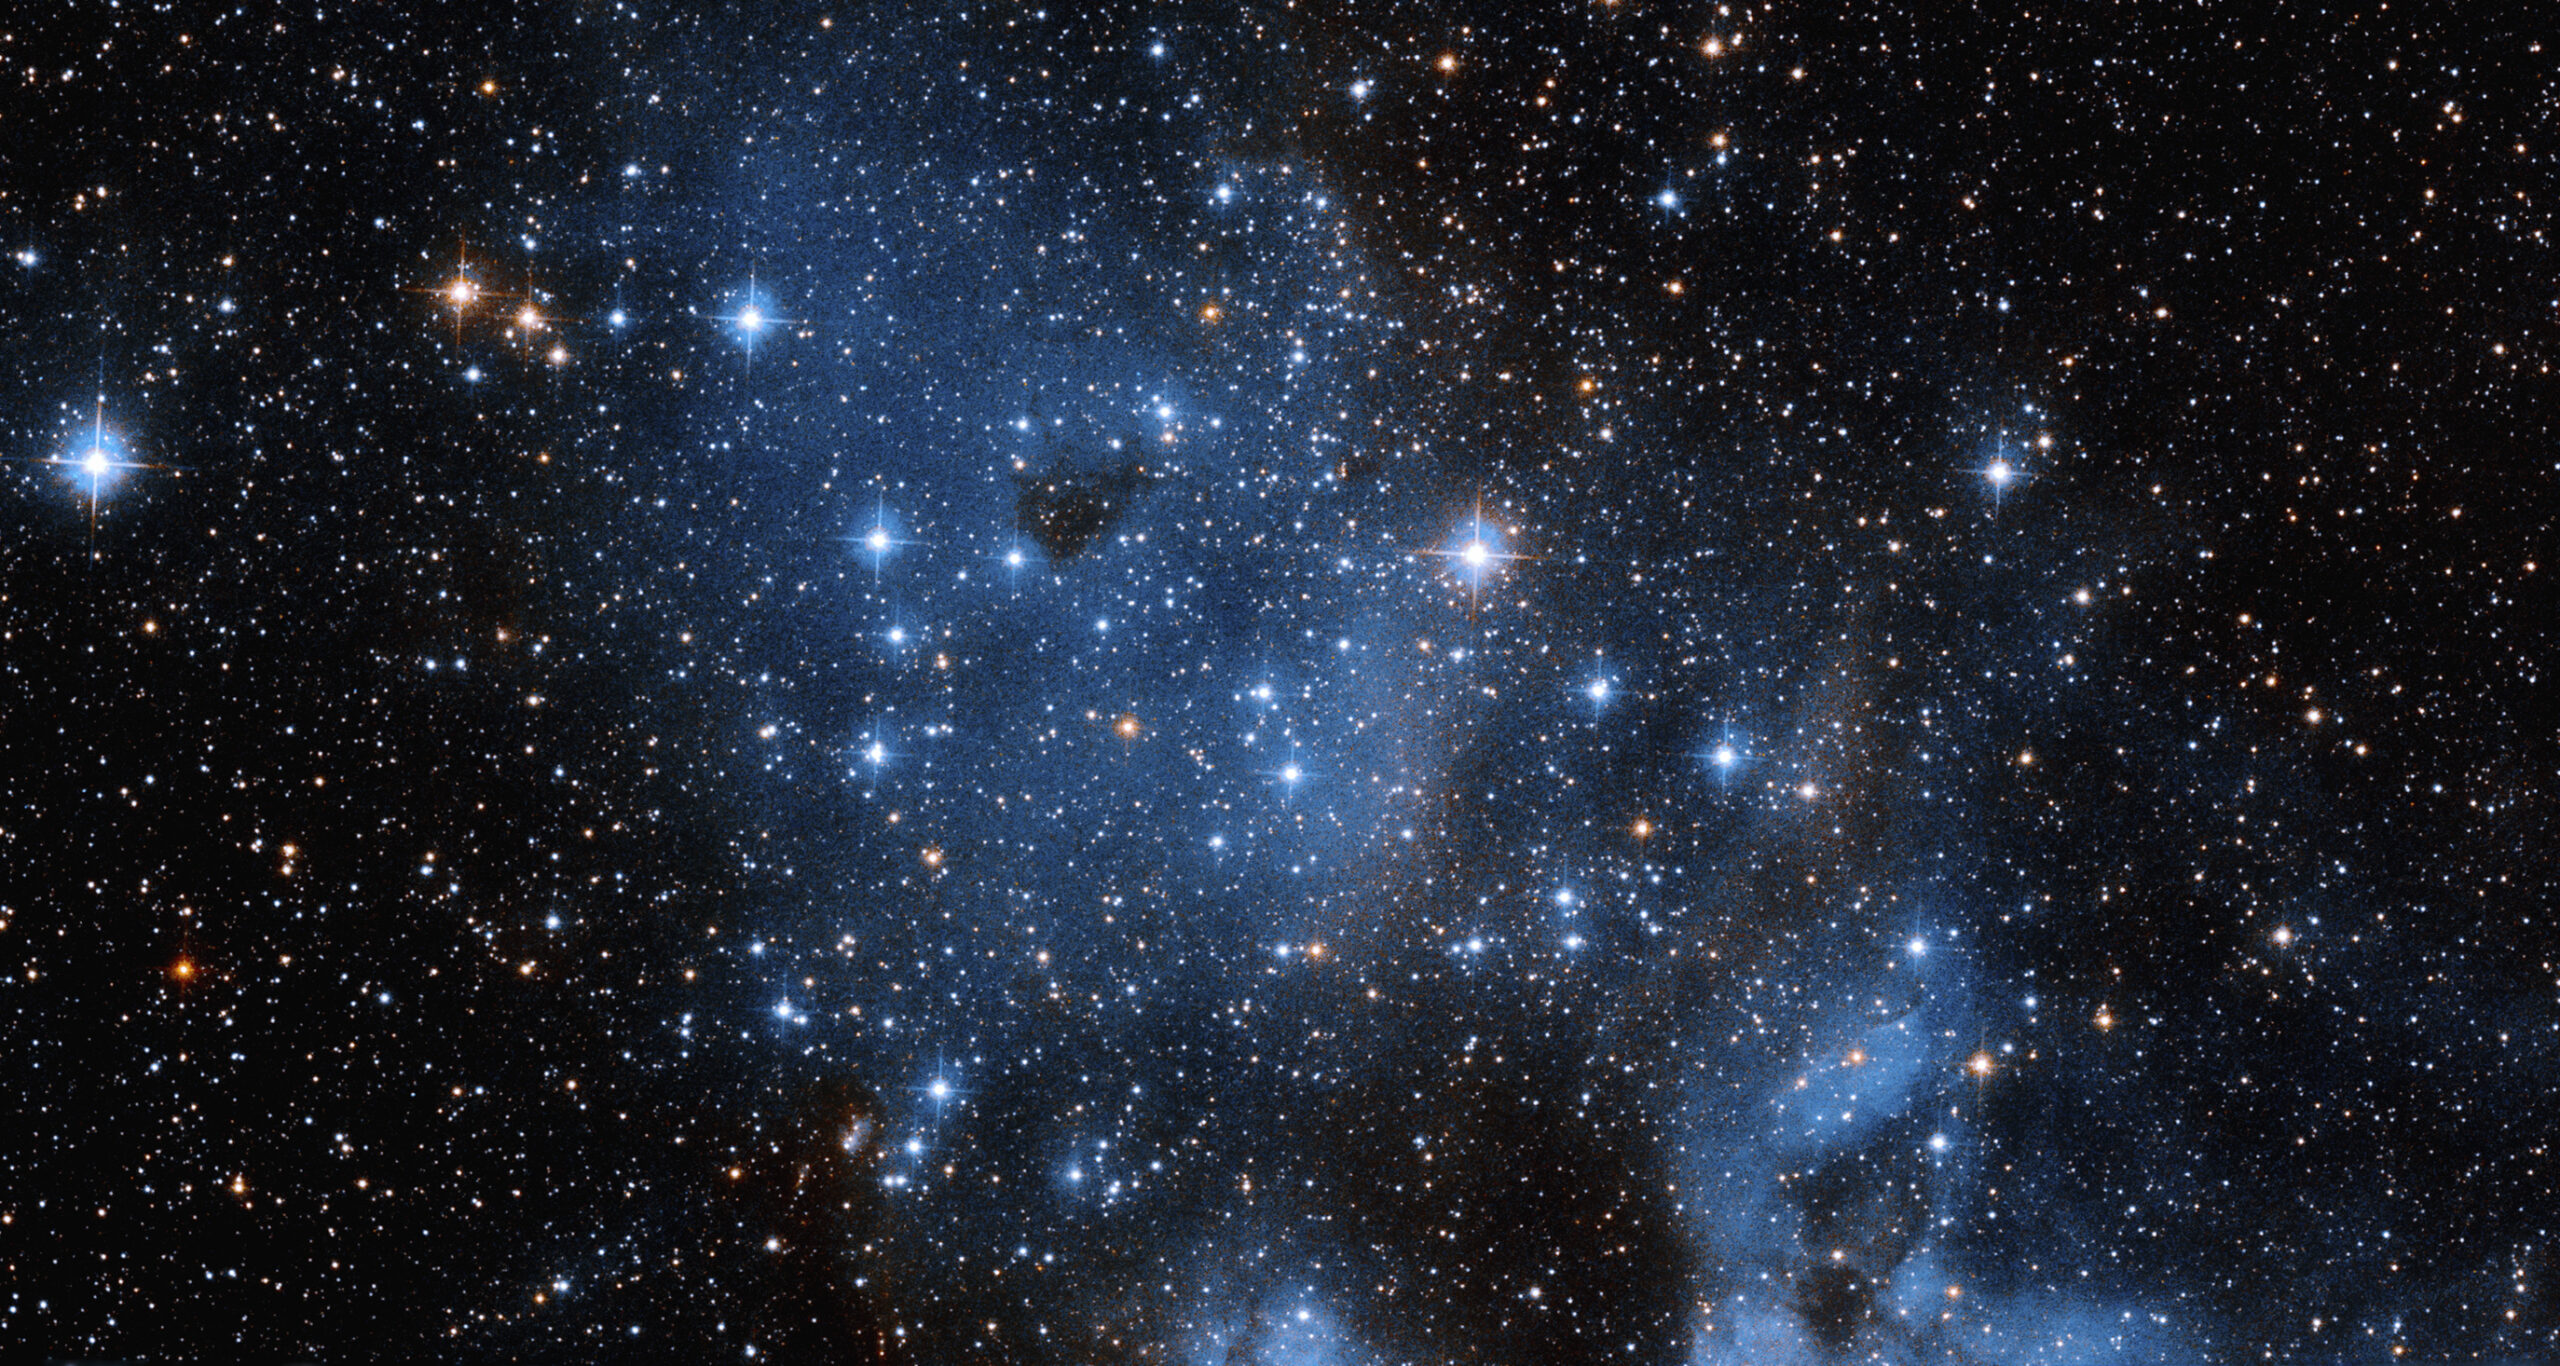 Emission Nebula-Star Cluster Duo from Hubble